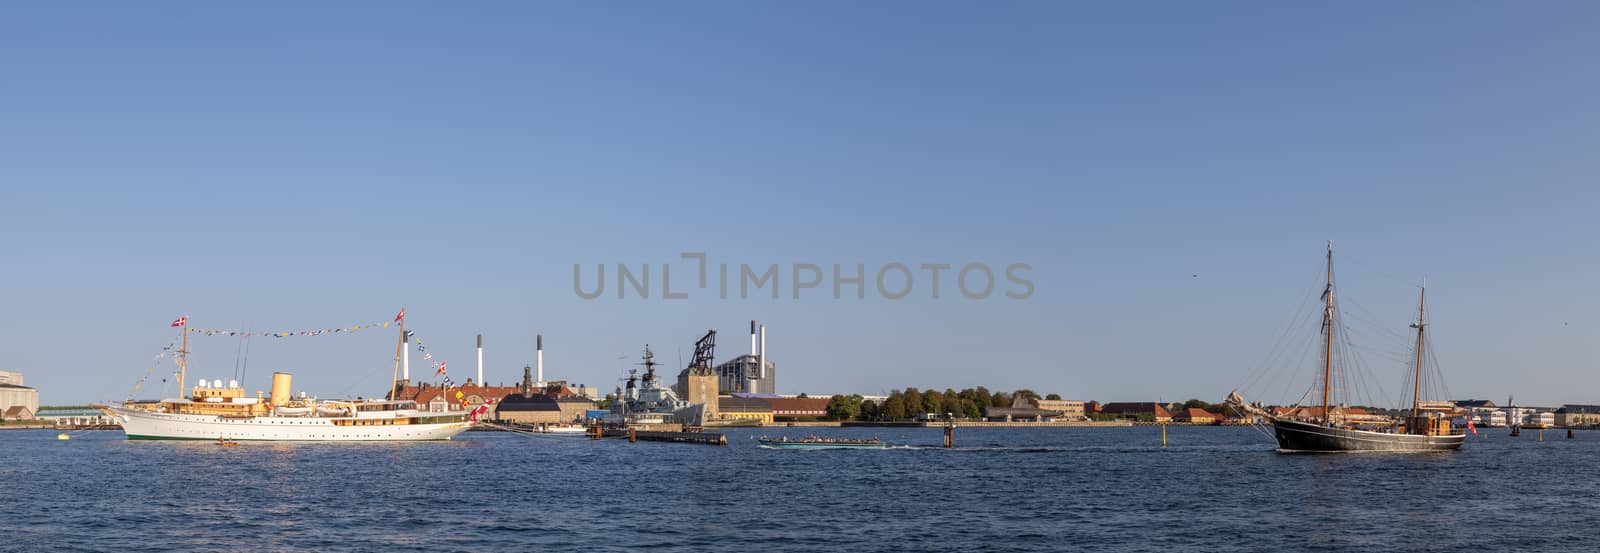 Copenhagen, Denmark - September 14, 2016: Panoramic harbor view with the royal yacht Dannebrog and a sailboat